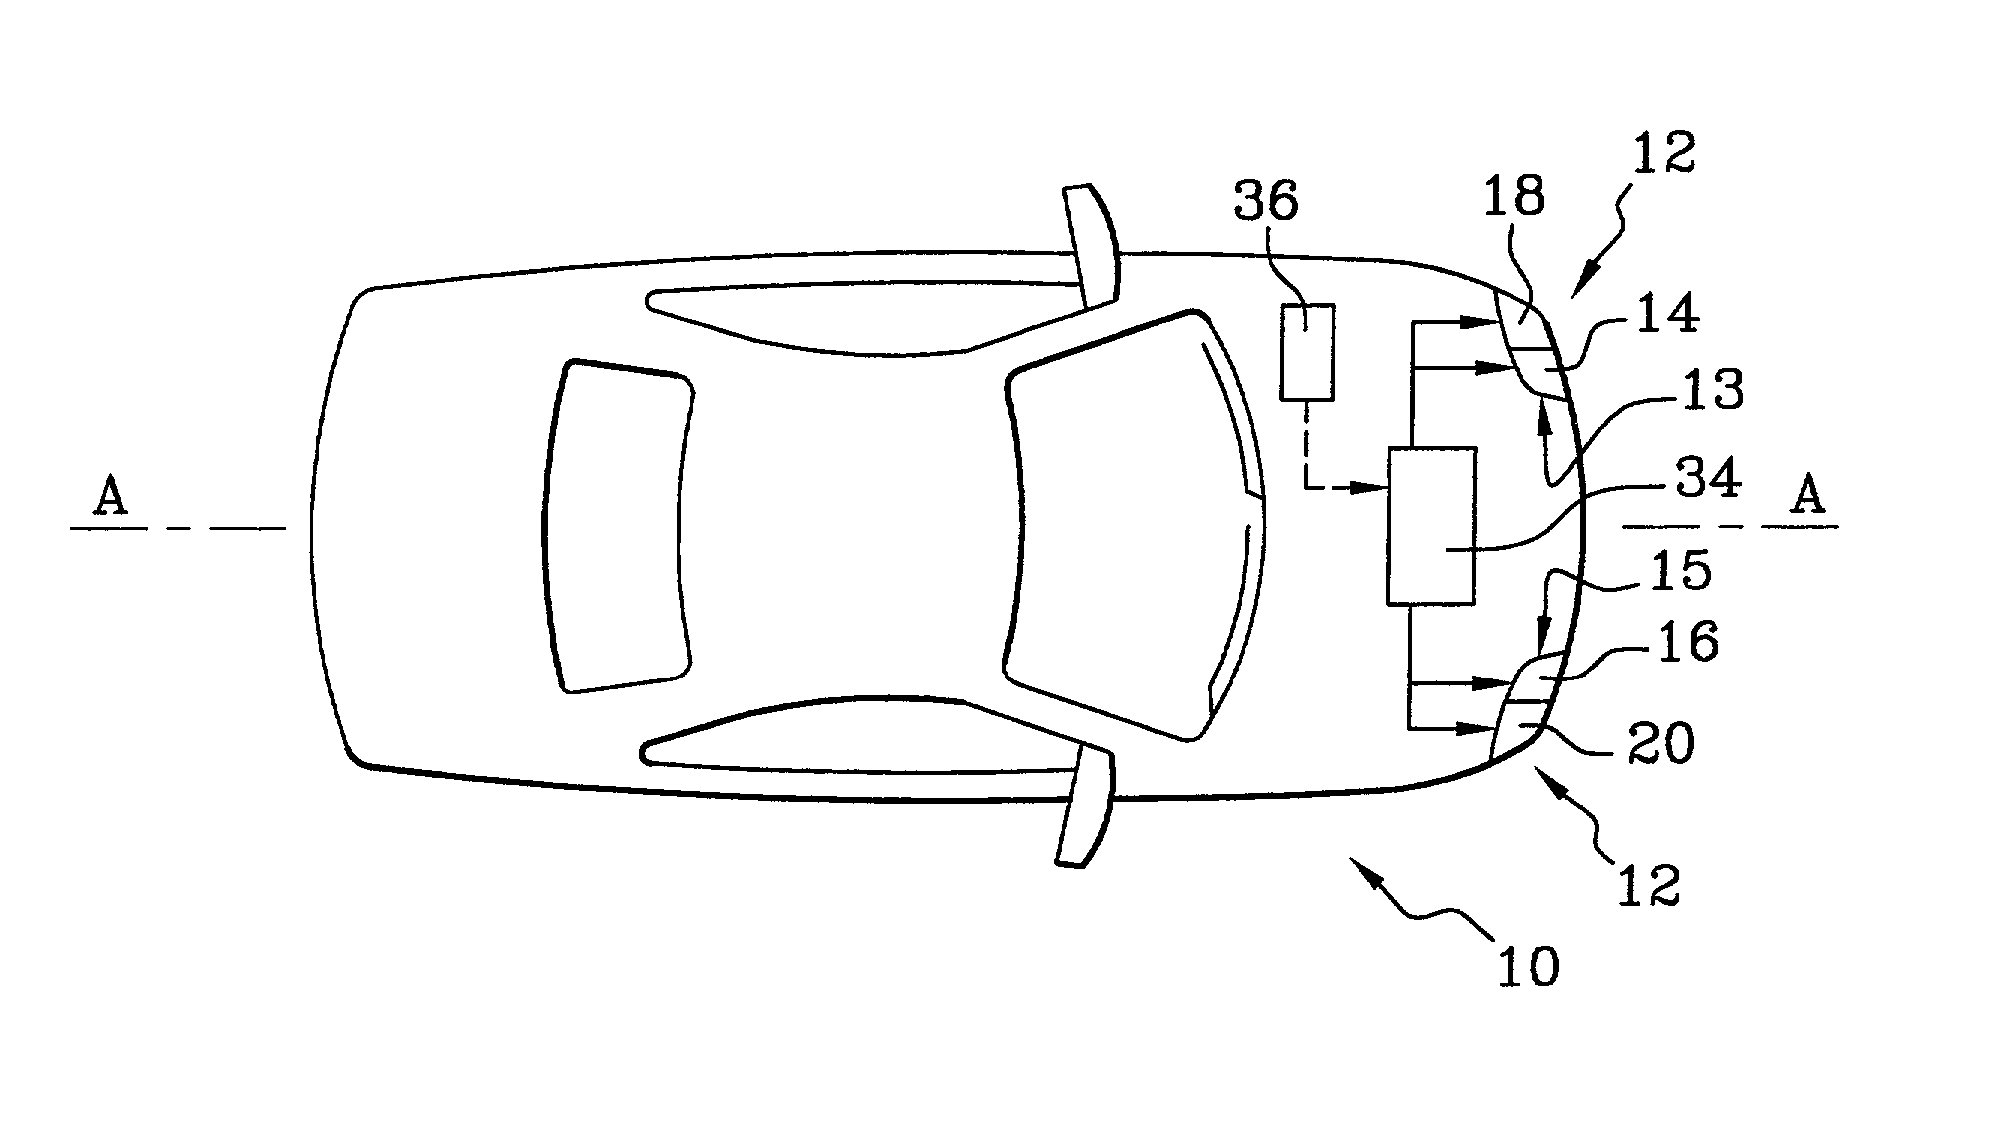 Apparatus for a motor vehicle, for lighting bends negotiated by the vehicle